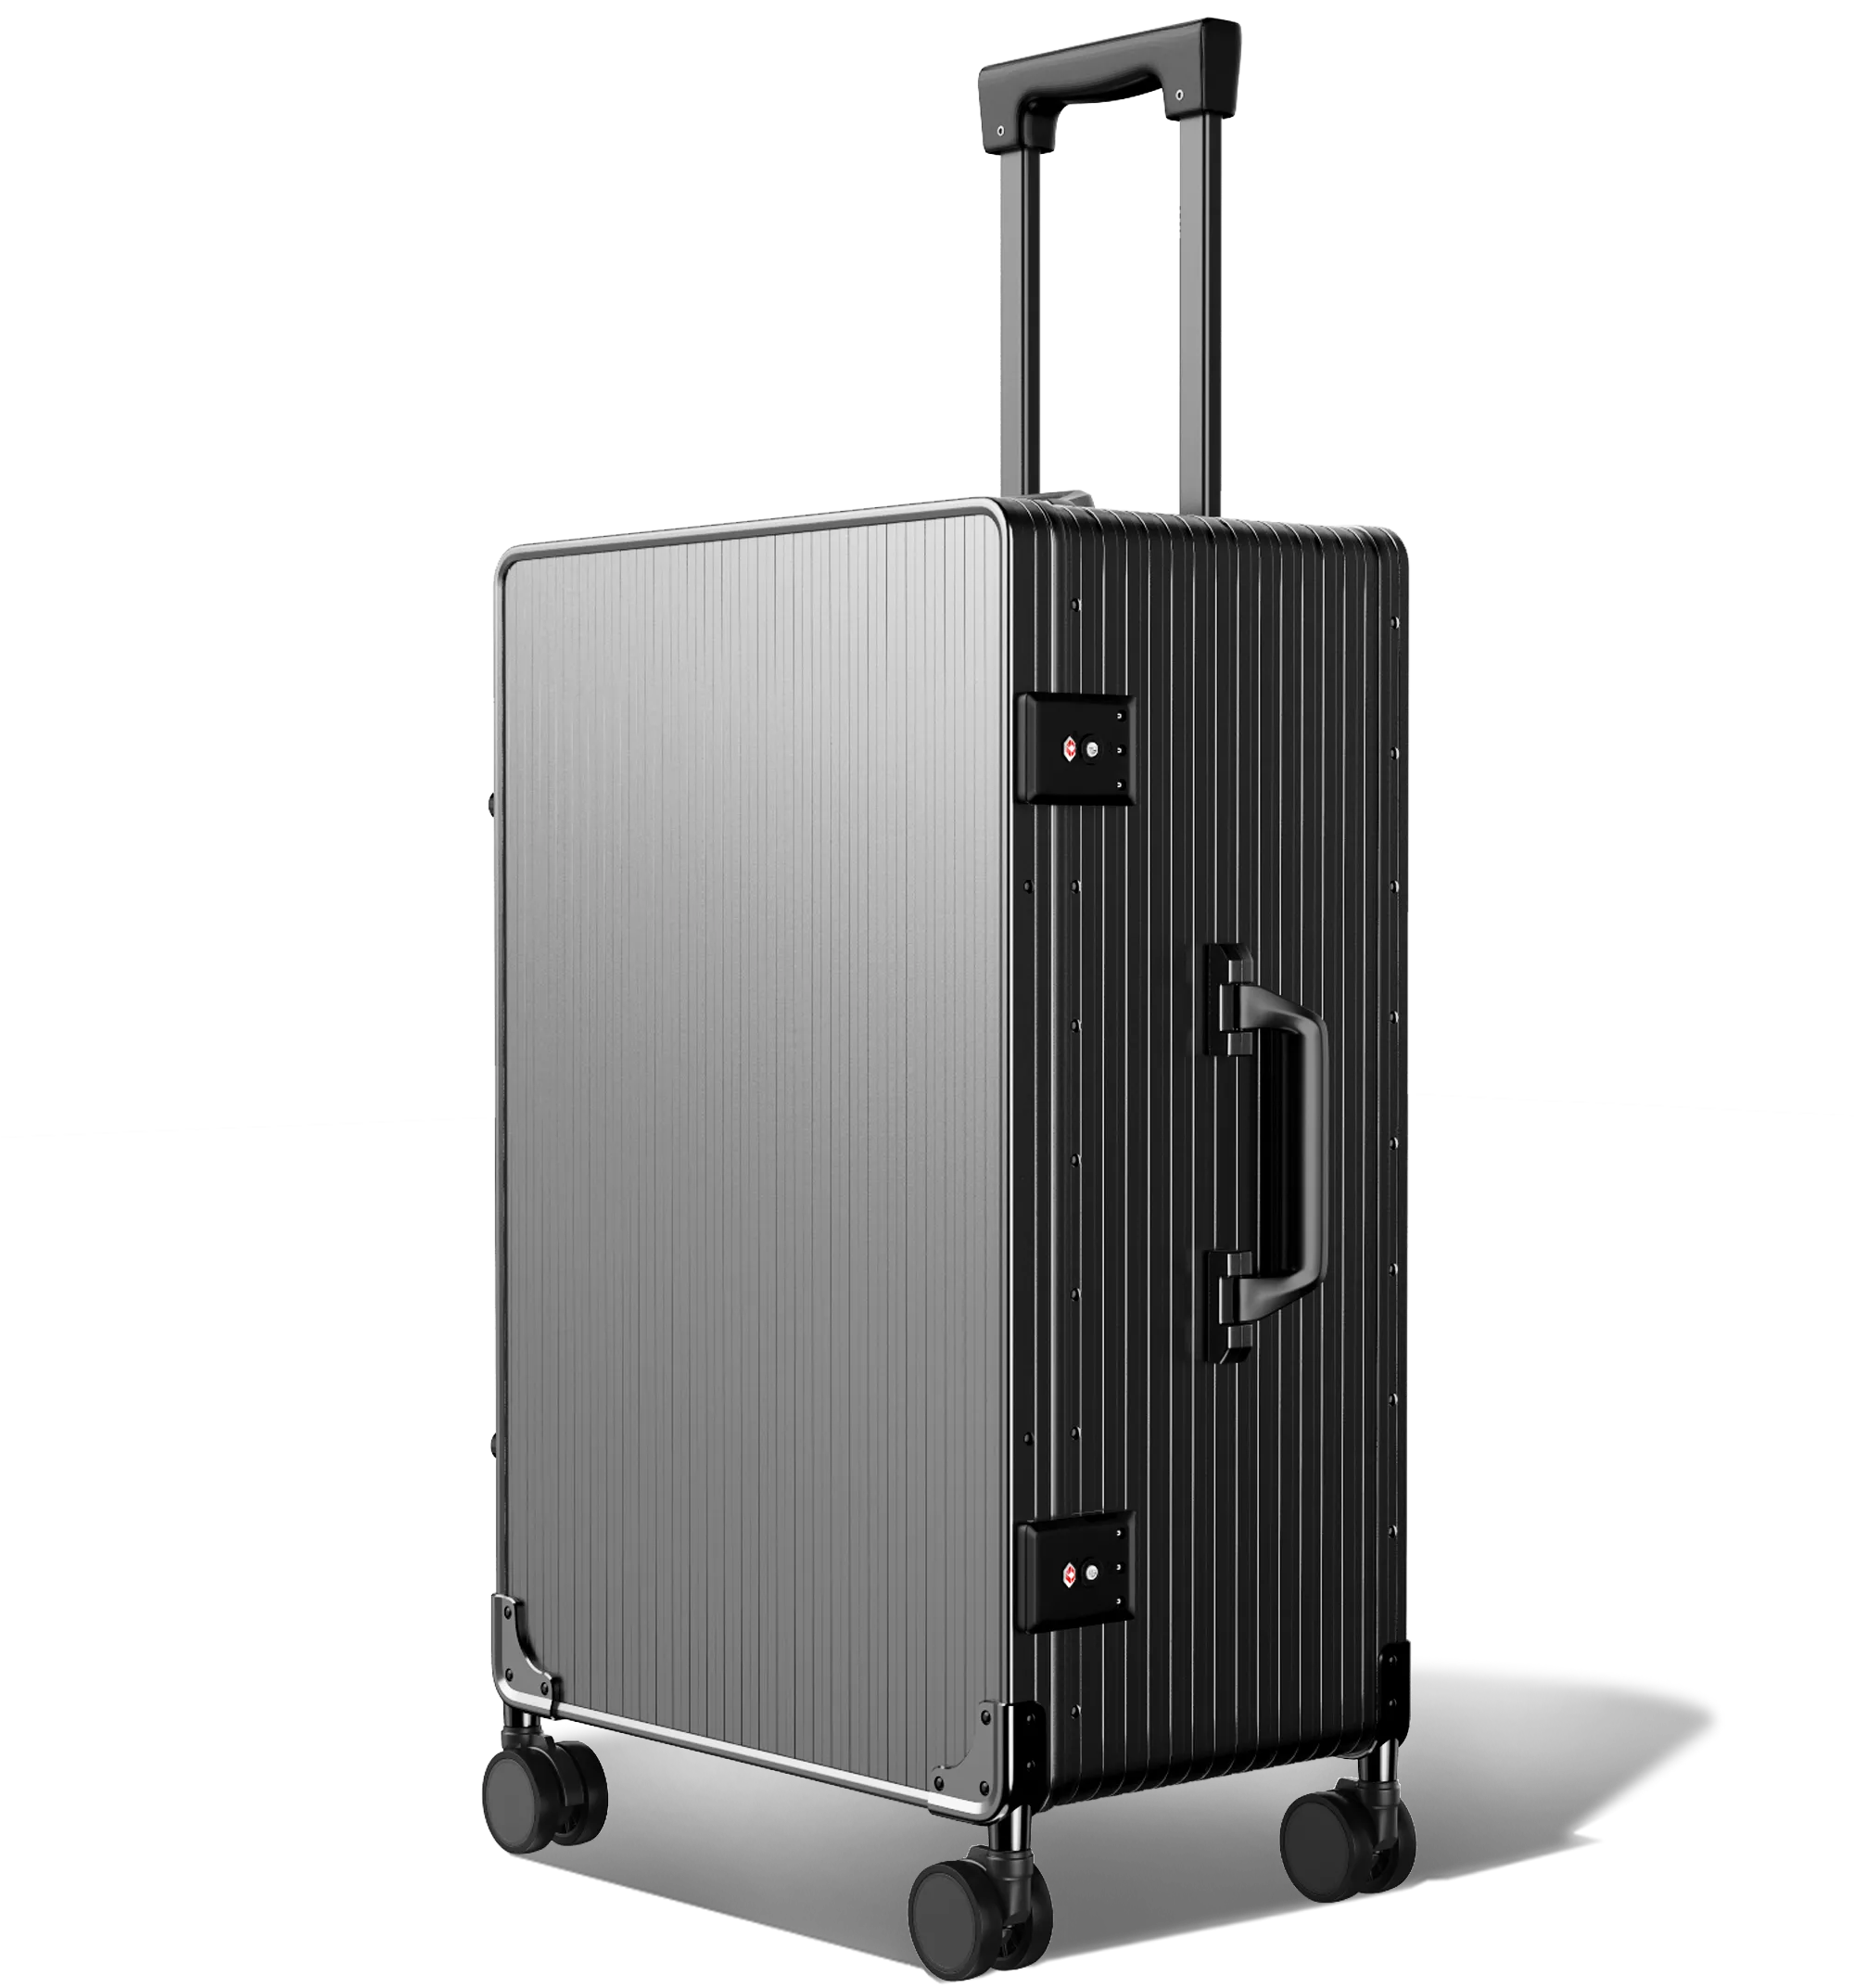 A three-quarter view of an upright Check-In 65/25 black hard-shell aluminium Luggage with a textured surface, featuring an extended telescopic handle, a side handle, and four spinner wheels, set against a white background.